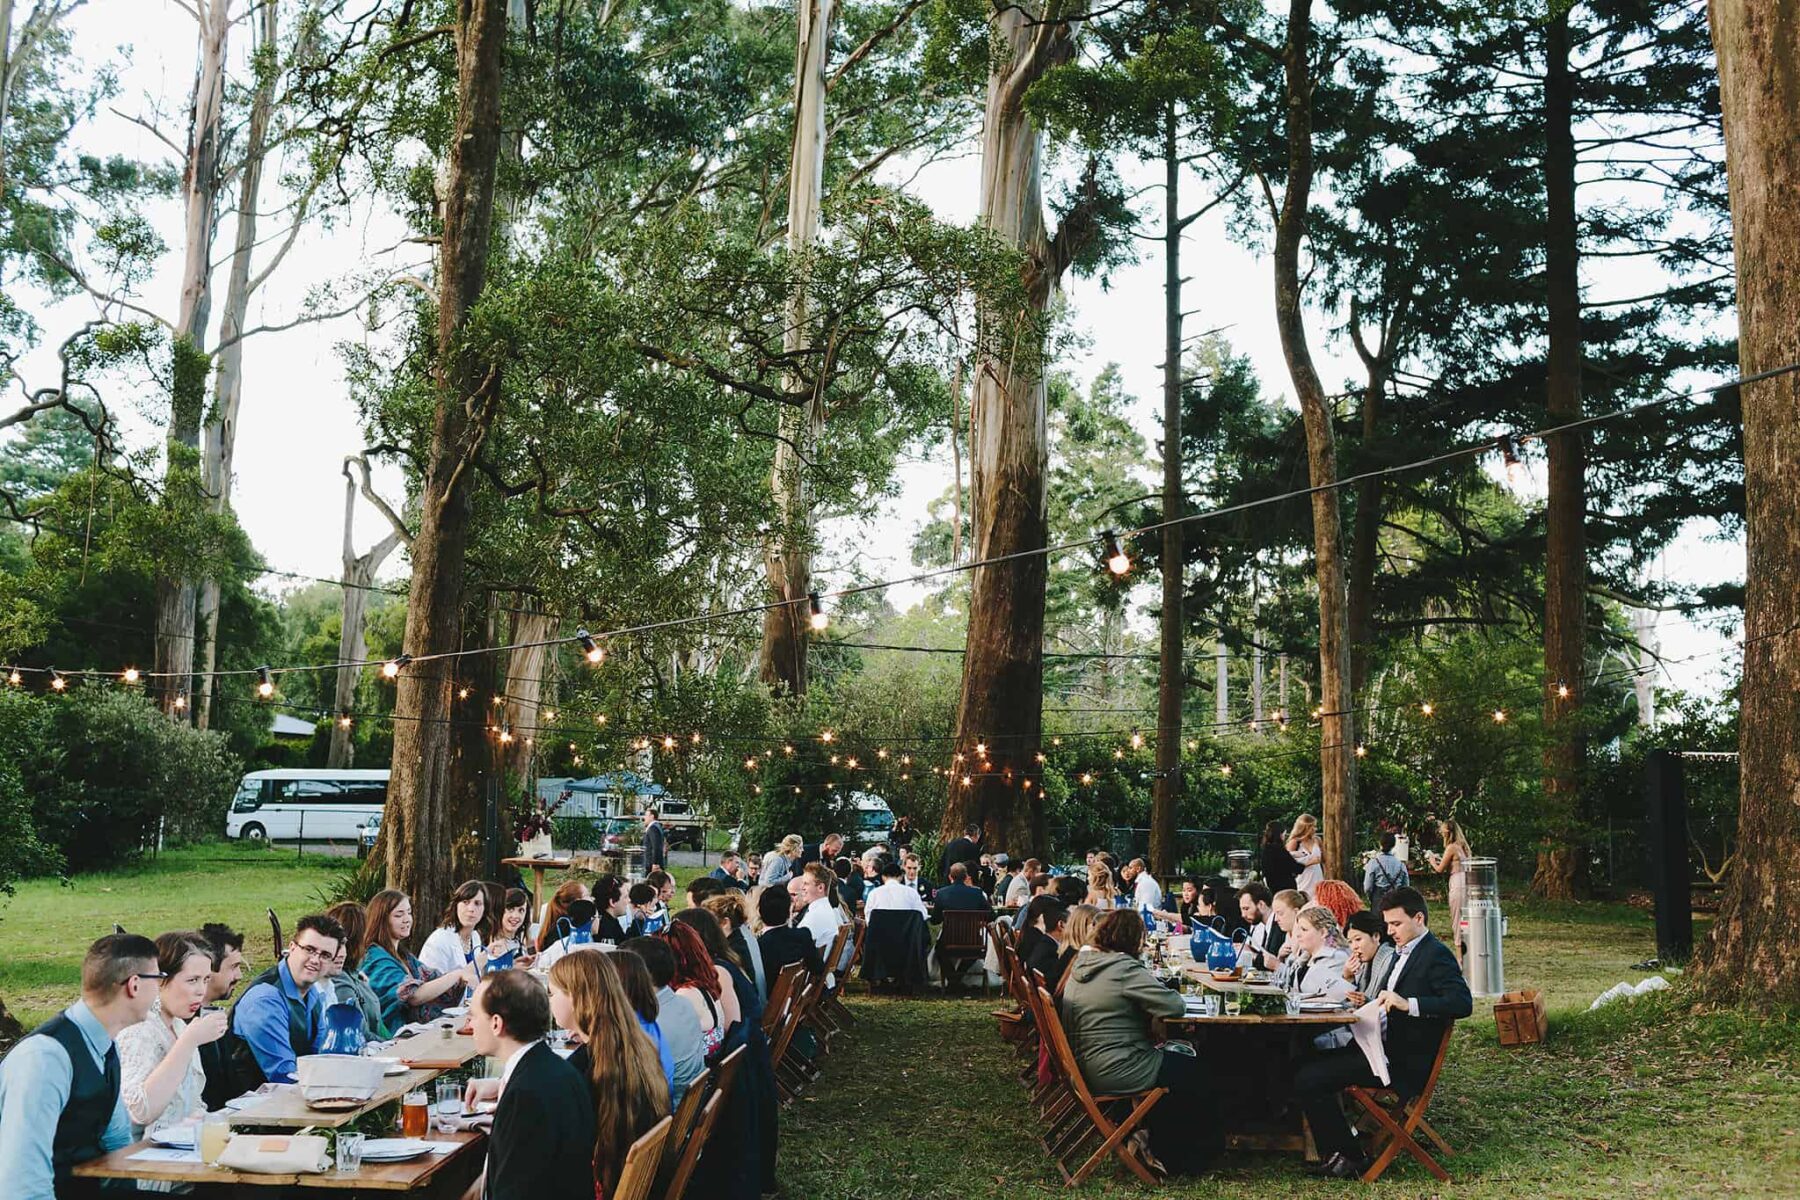 Fun, colourful wedding in the Dandenong Ranges VIC - photography by Jonathan Ong